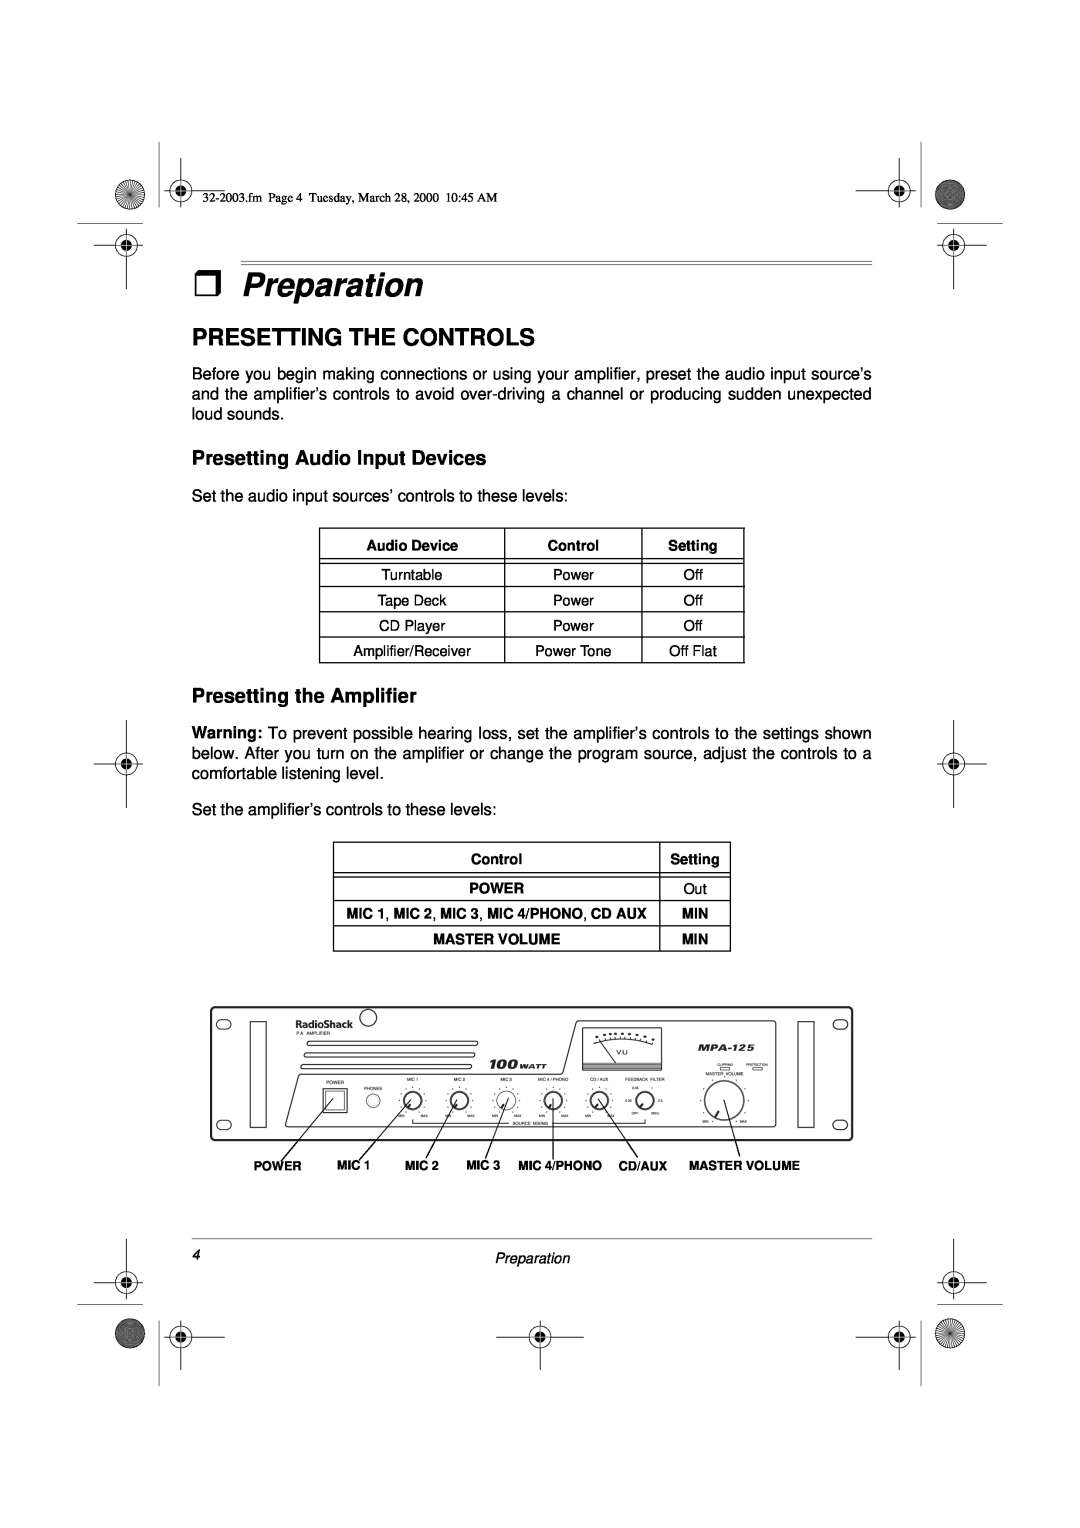 Radio Shack MPA-125 ˆPreparation, Presetting The Controls, Presetting Audio Input Devices, Presetting the Amplifier 